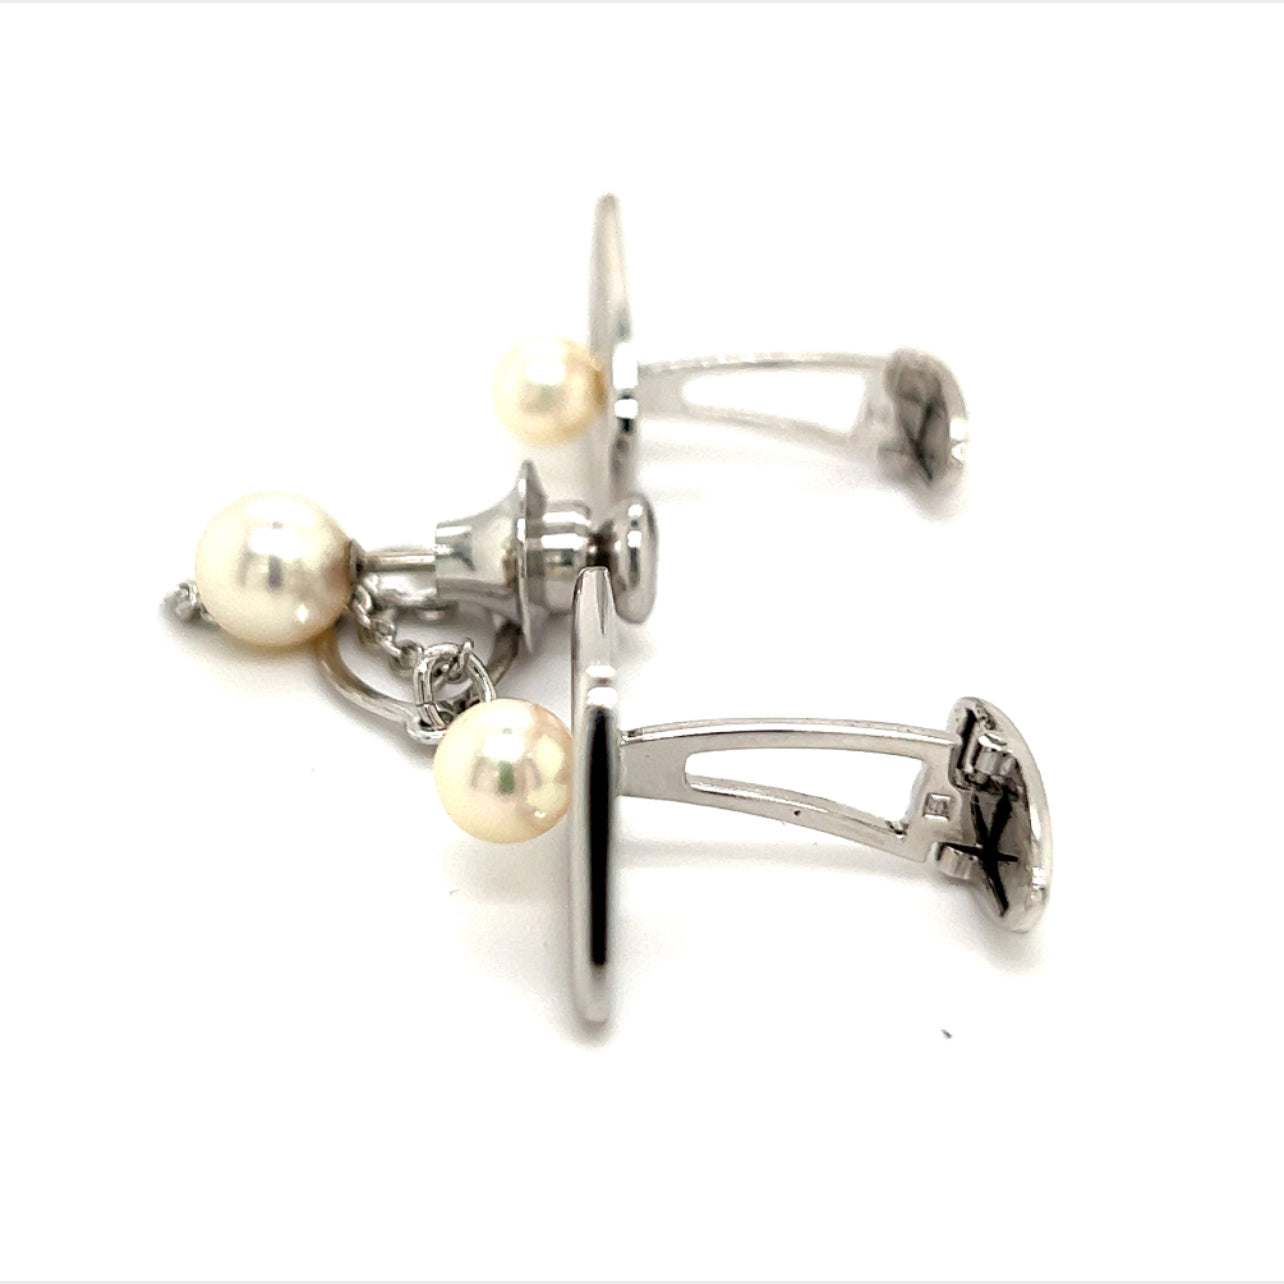 Mikimoto Estate Akoya Pearl Cufflinks and Tie Pin Sterling Silver 7.28 mm M276 - Certified Fine Jewelry